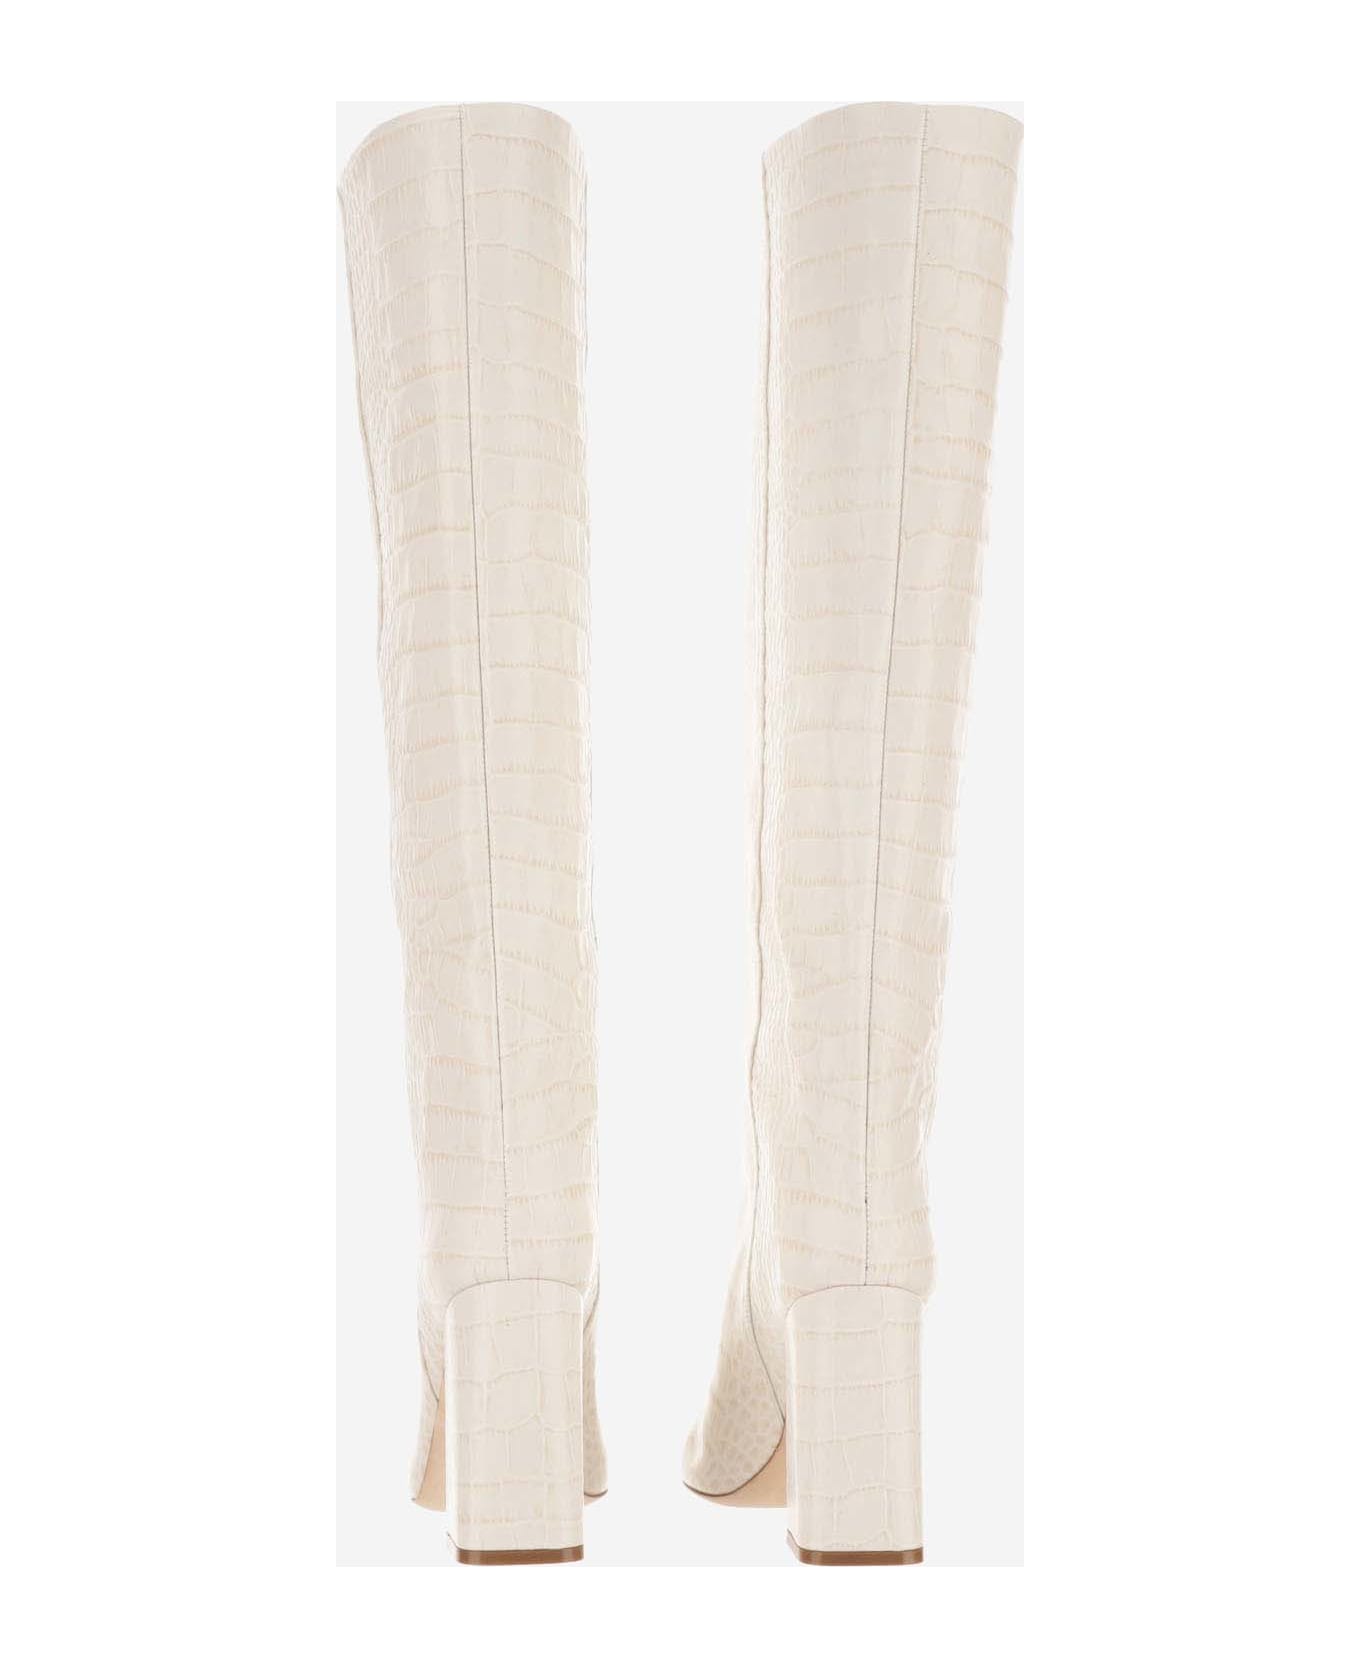 Paris Texas Leather Boot With Croc Print - Bianco